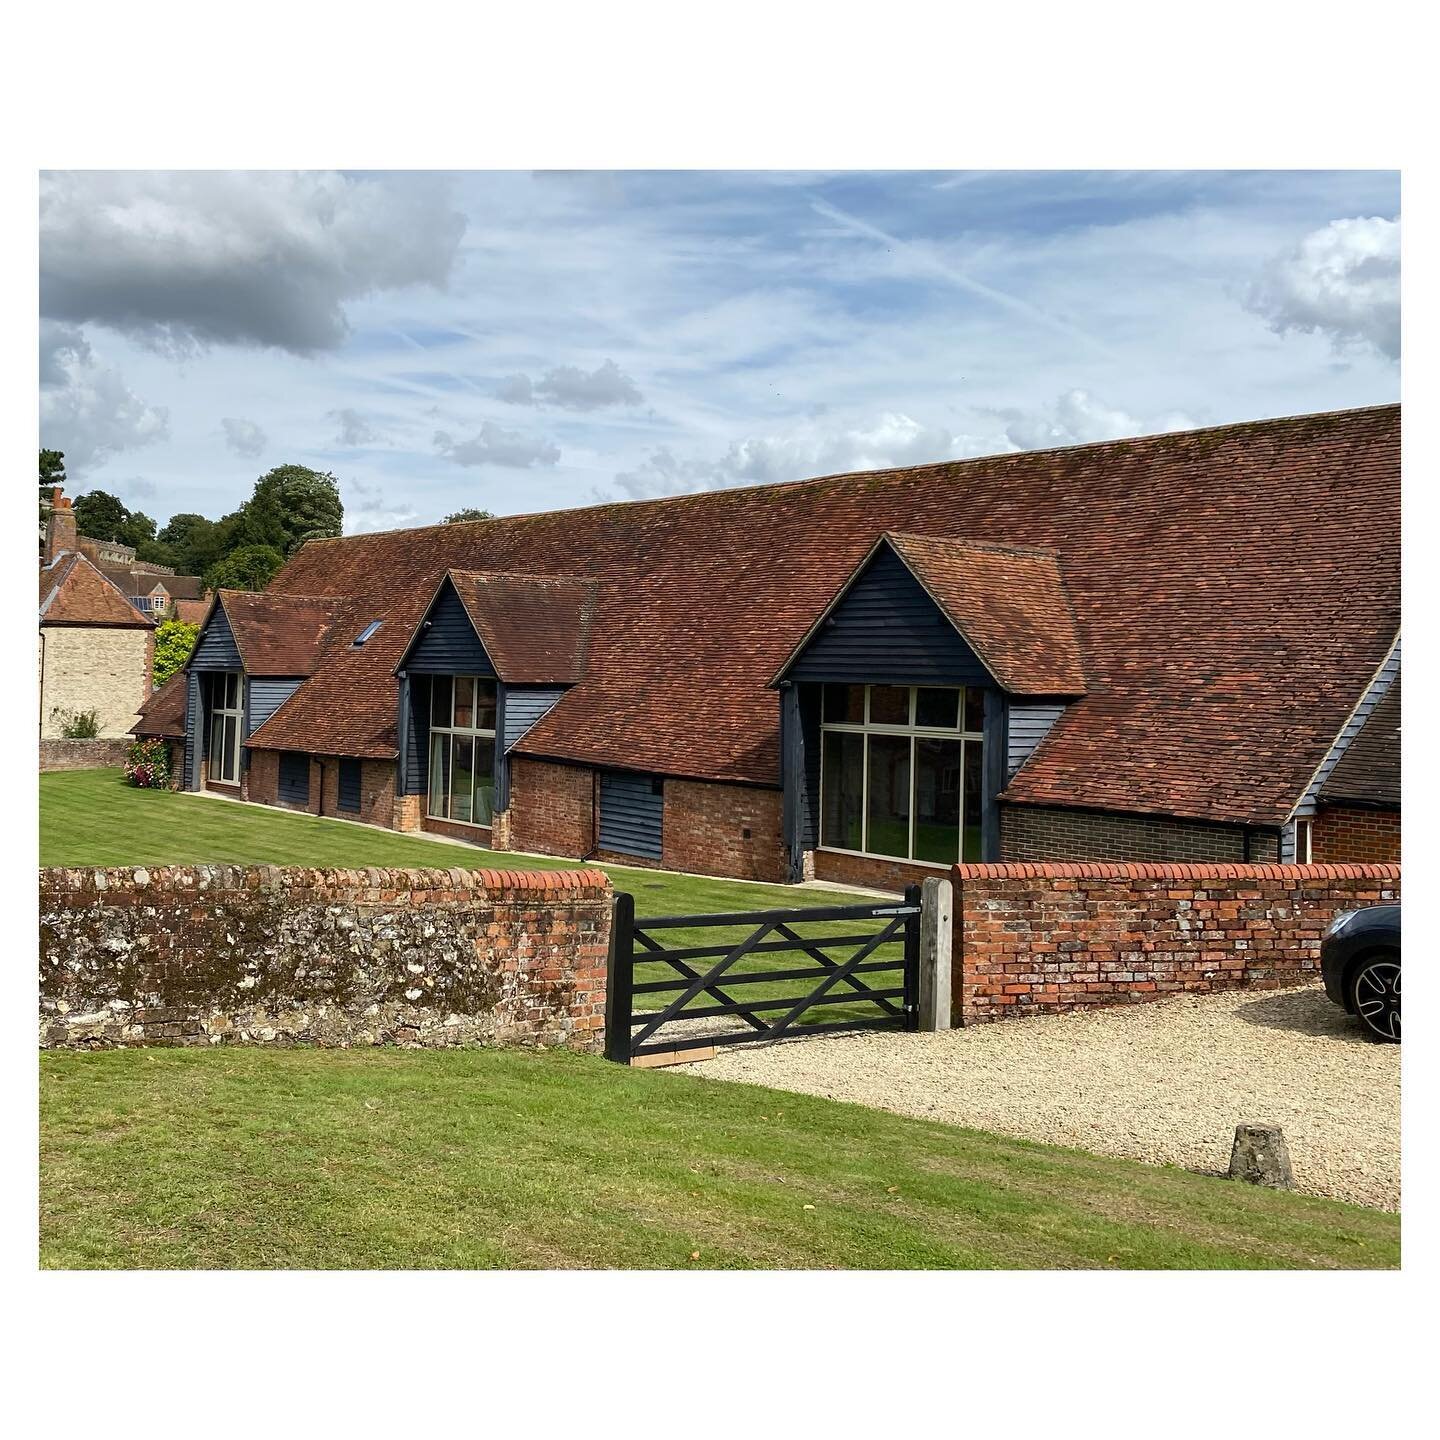 Can&rsquo;t wait to show you the inside of this lovely old Tithe Barn project!.. six rooms of which we&rsquo;re currently creating furniture for
.
.
.
.
#bespokekitchen #barnconversion #bespokefurniture #interiordesign #tithebarn #southoxfordshirecou